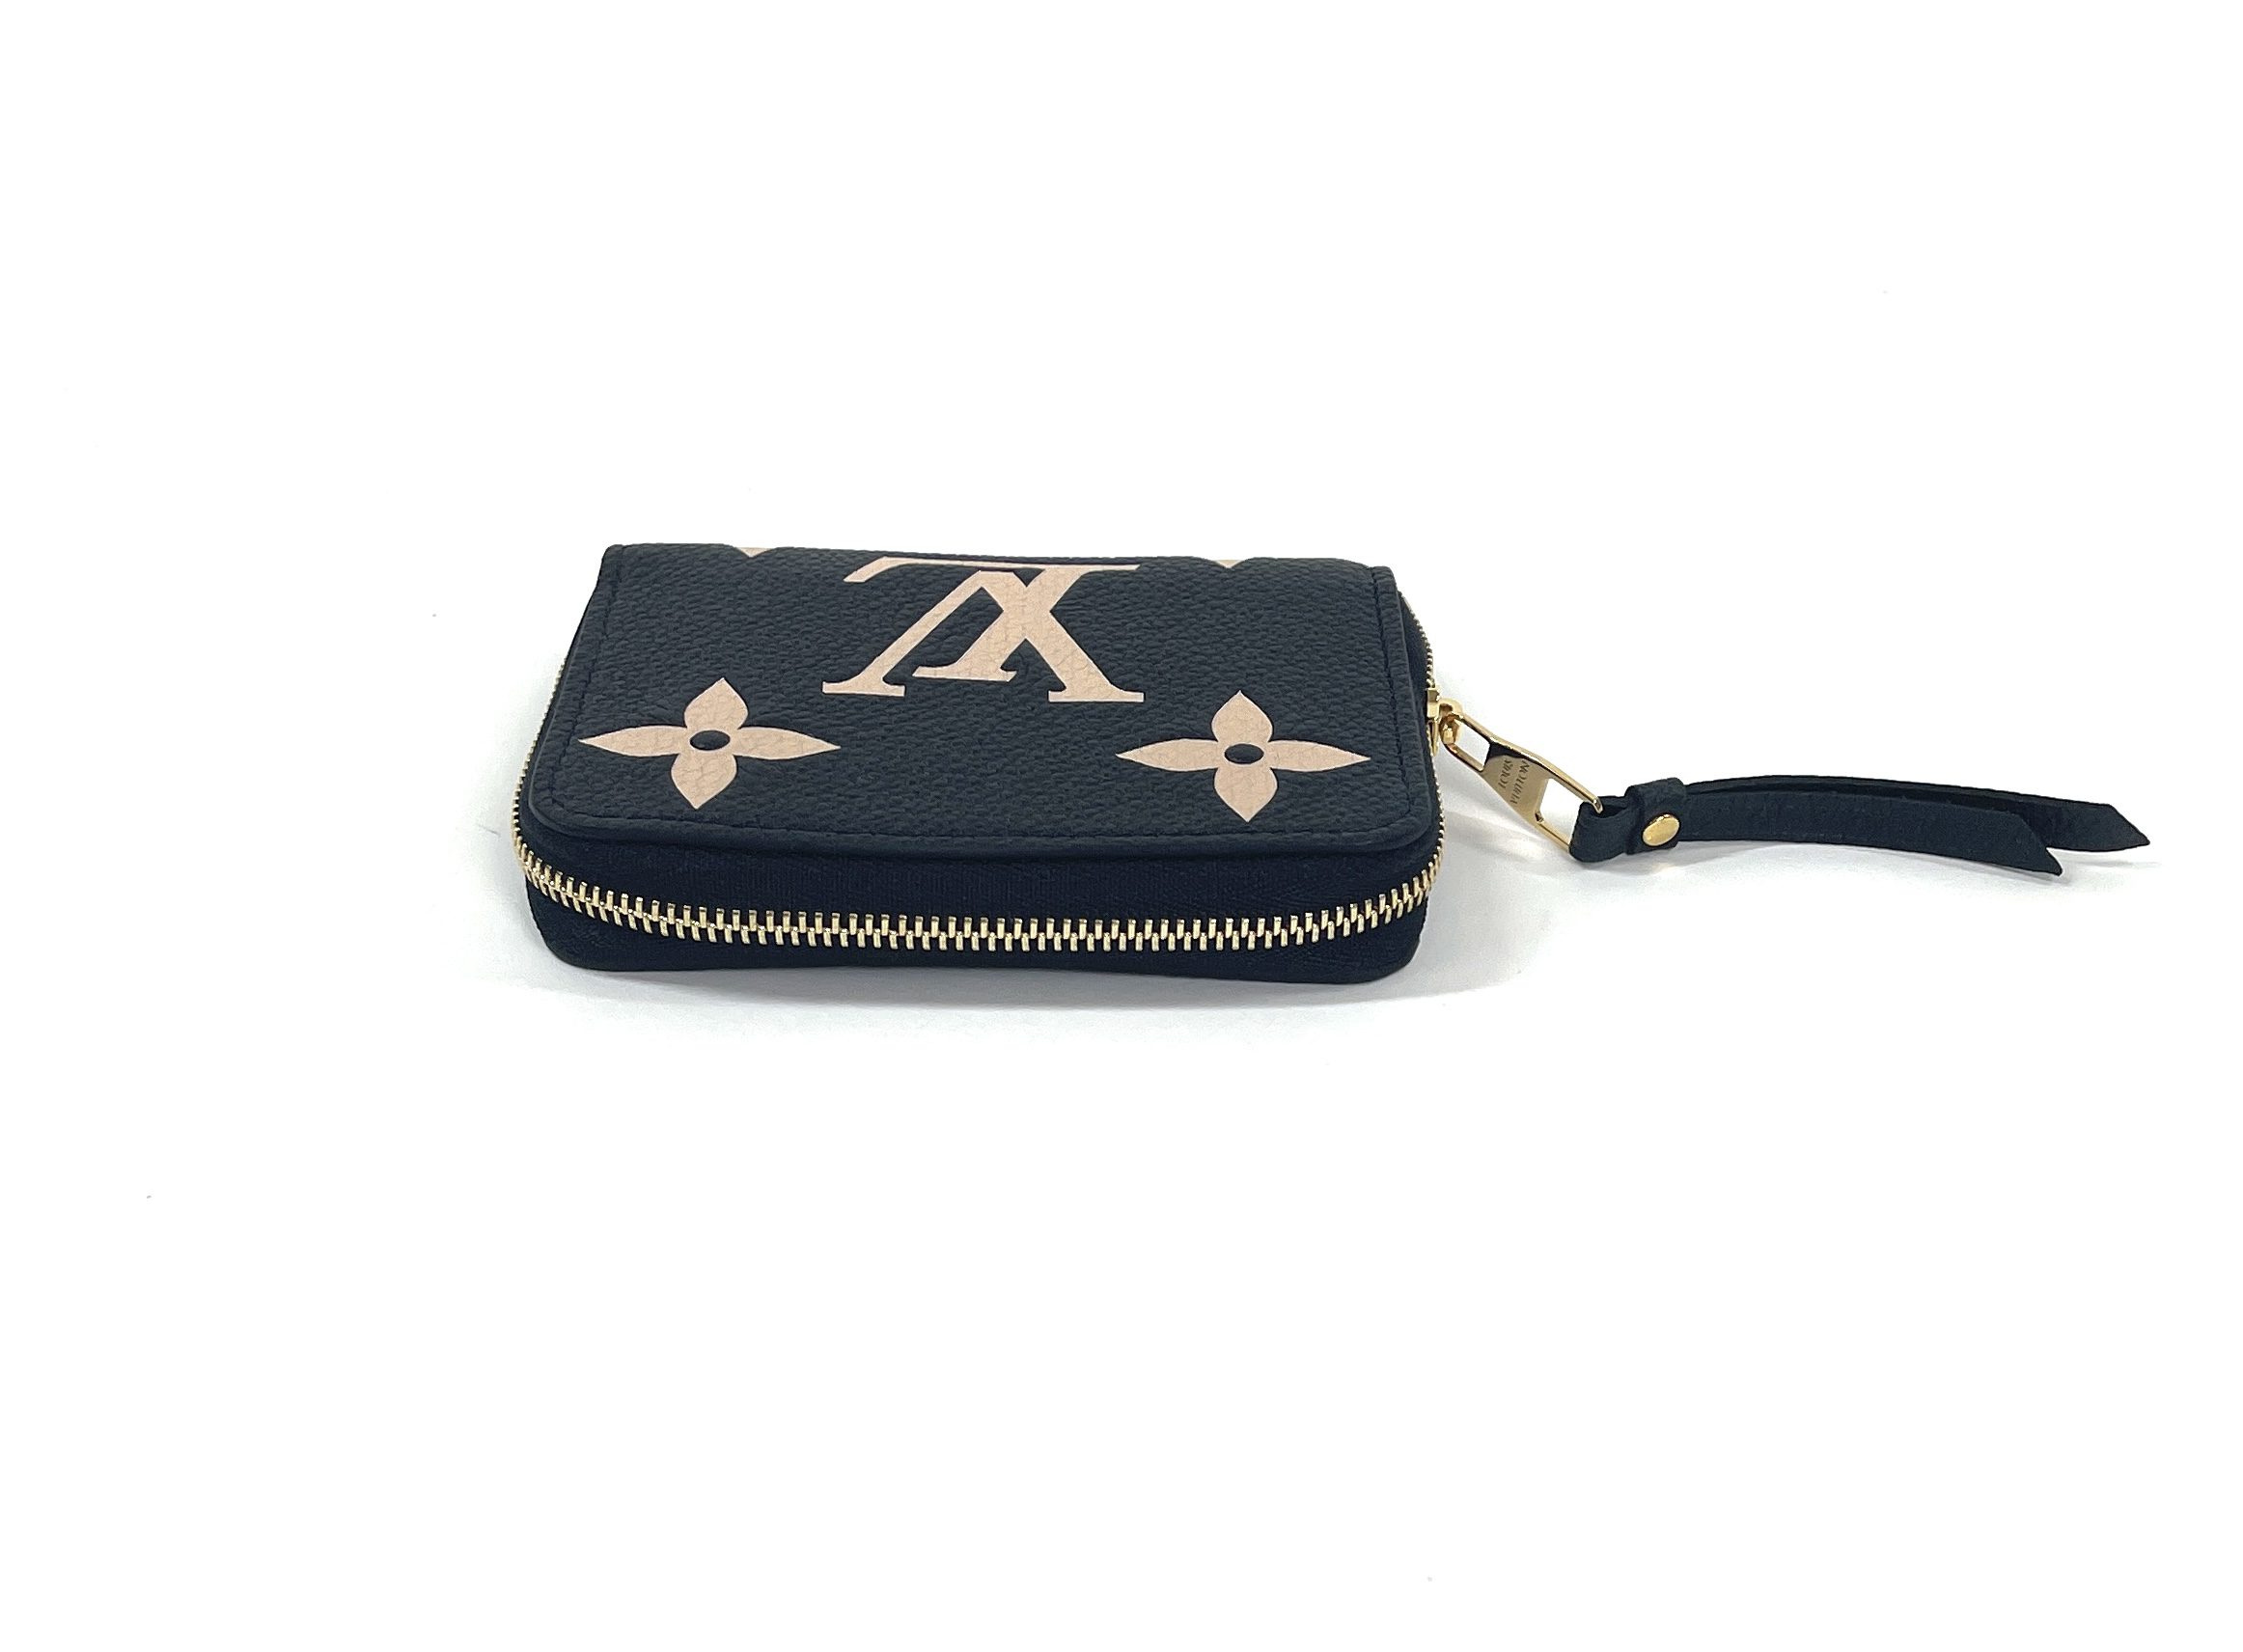 Zippy Coin Purse Monogram Vernis Leather - Wallets and Small